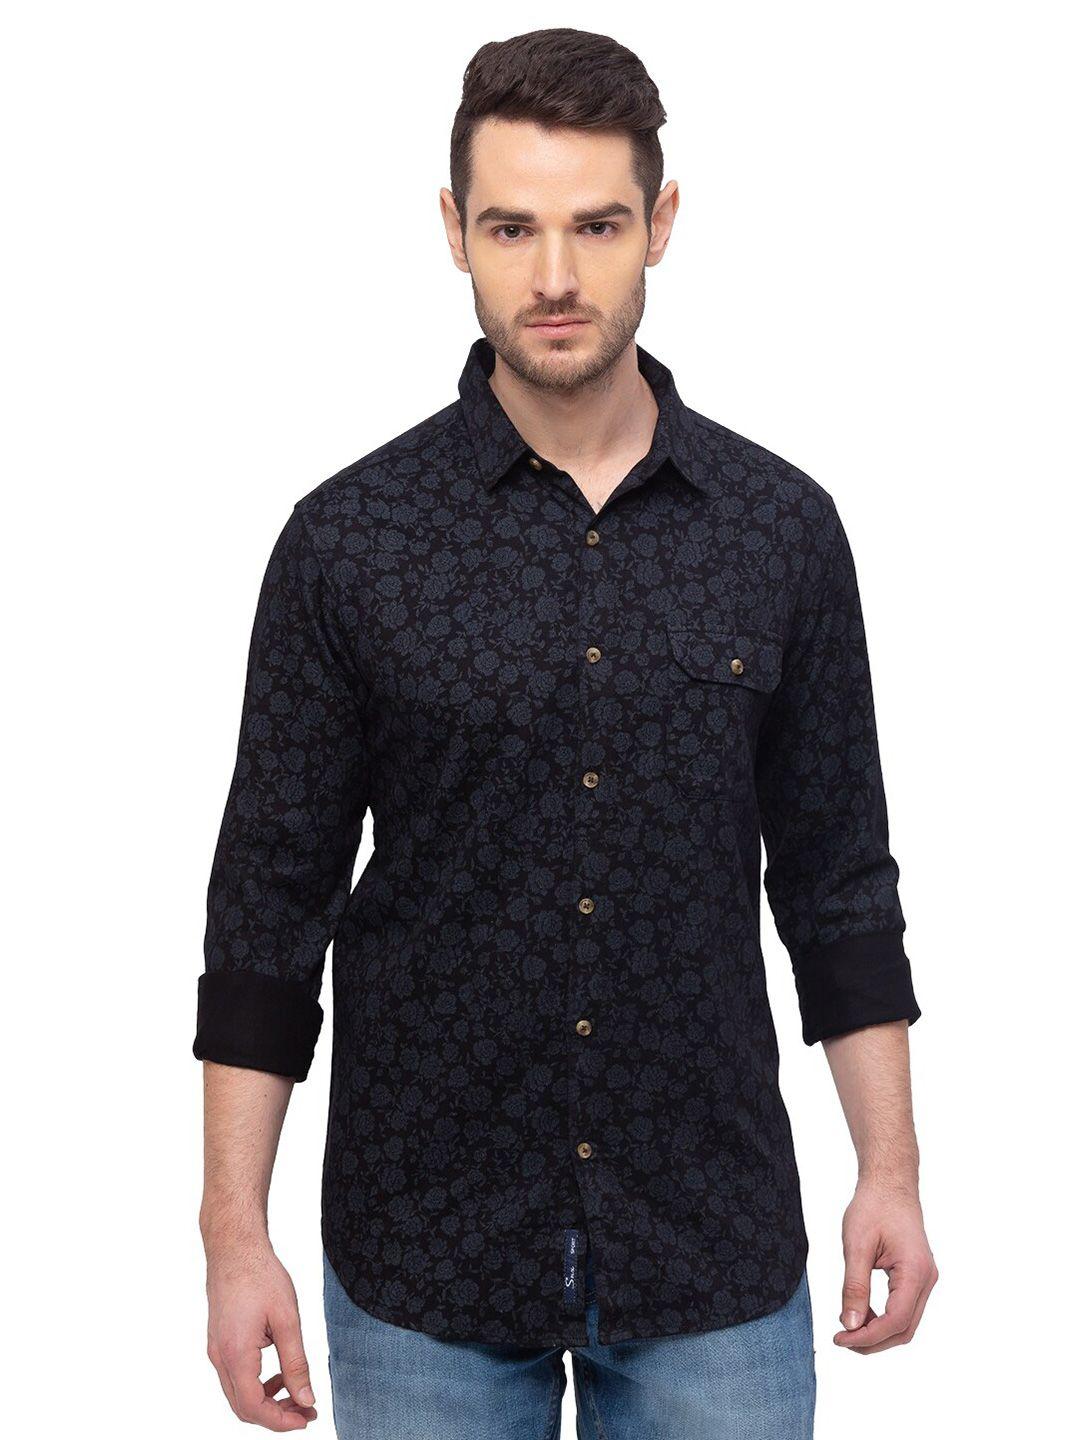 snx floral printed classic tailored fit pure cotton casual shirt